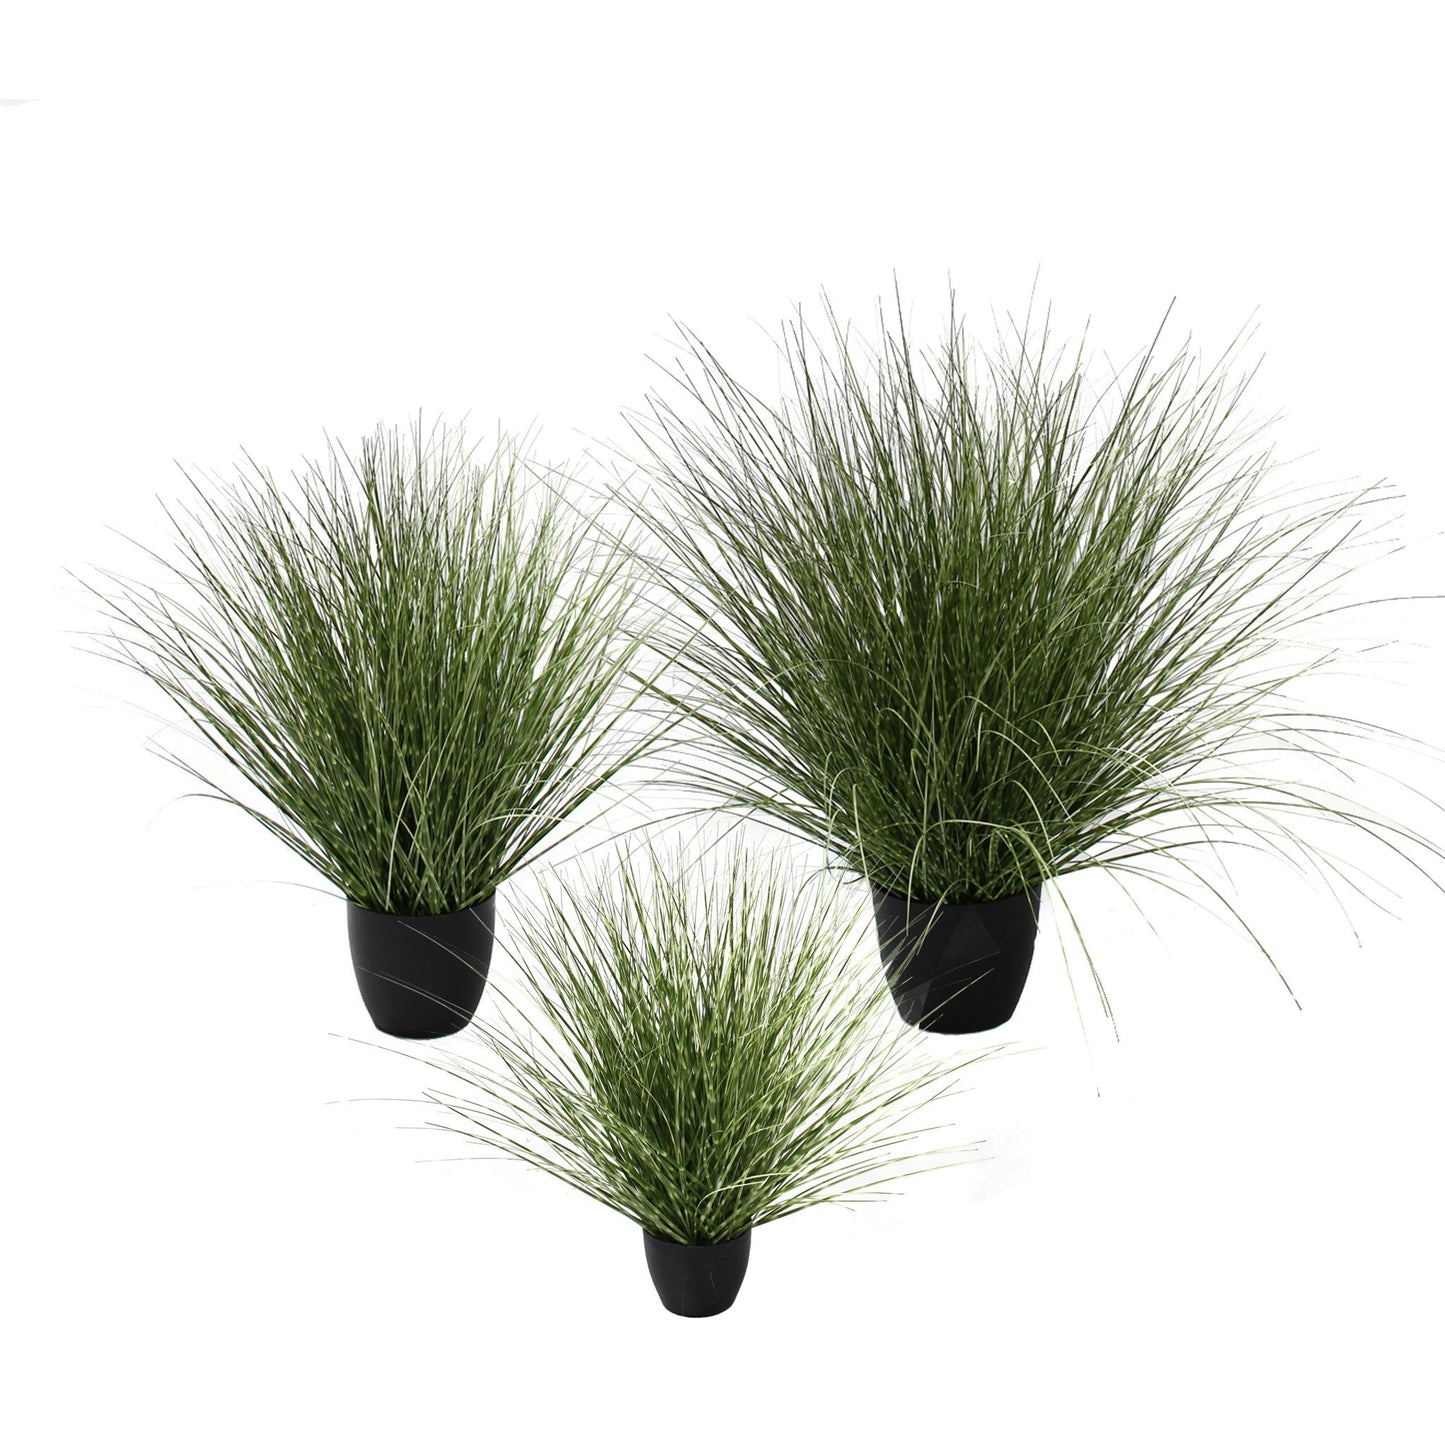 Spotted River Grass Potted